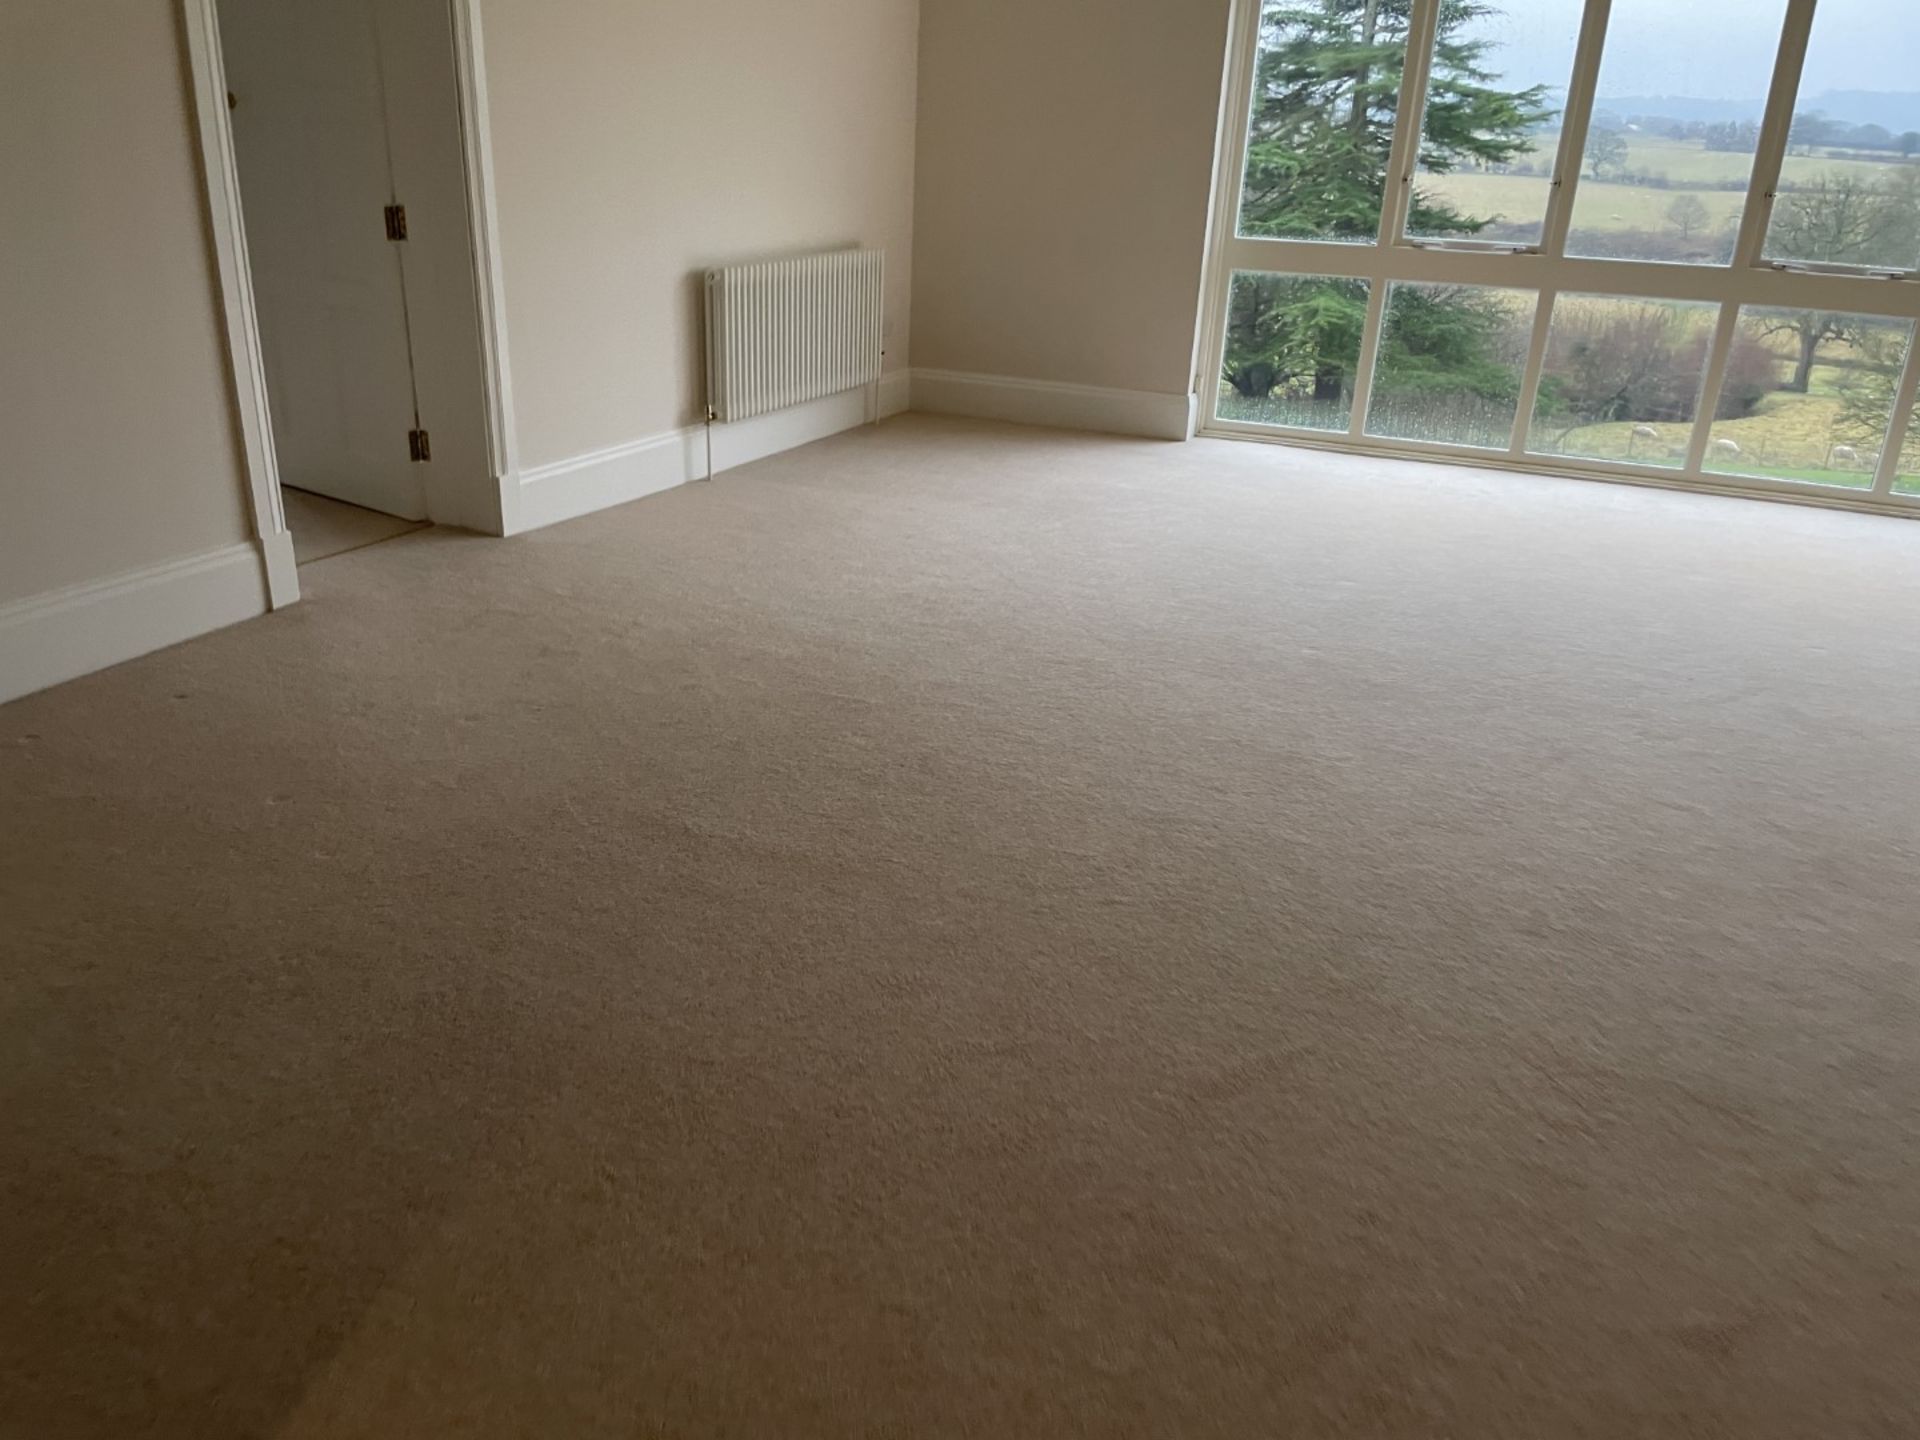 1 x Luxury Wool Master Bedroom Carpet in a Neutral Tone with Premium Underlay - Ref: UPSTRS/1 - - Image 9 of 9